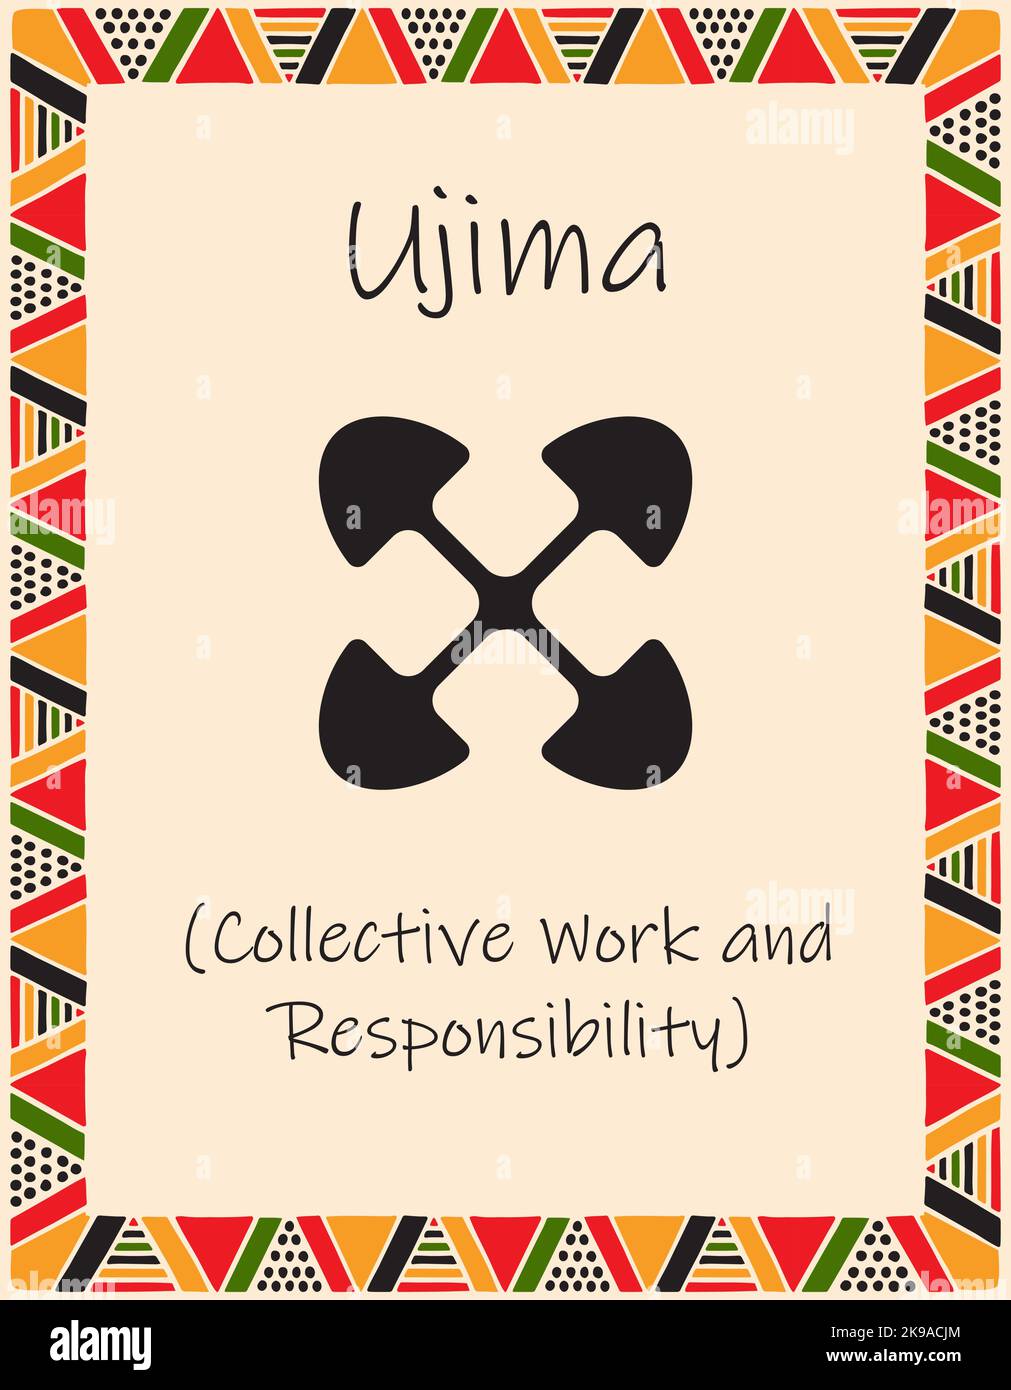 A card with one of the Kwanzaa principles. Symbol Ujiima means Collective work and responsibility in Swahili. Poster with an ethnic African pattern in Stock Vector